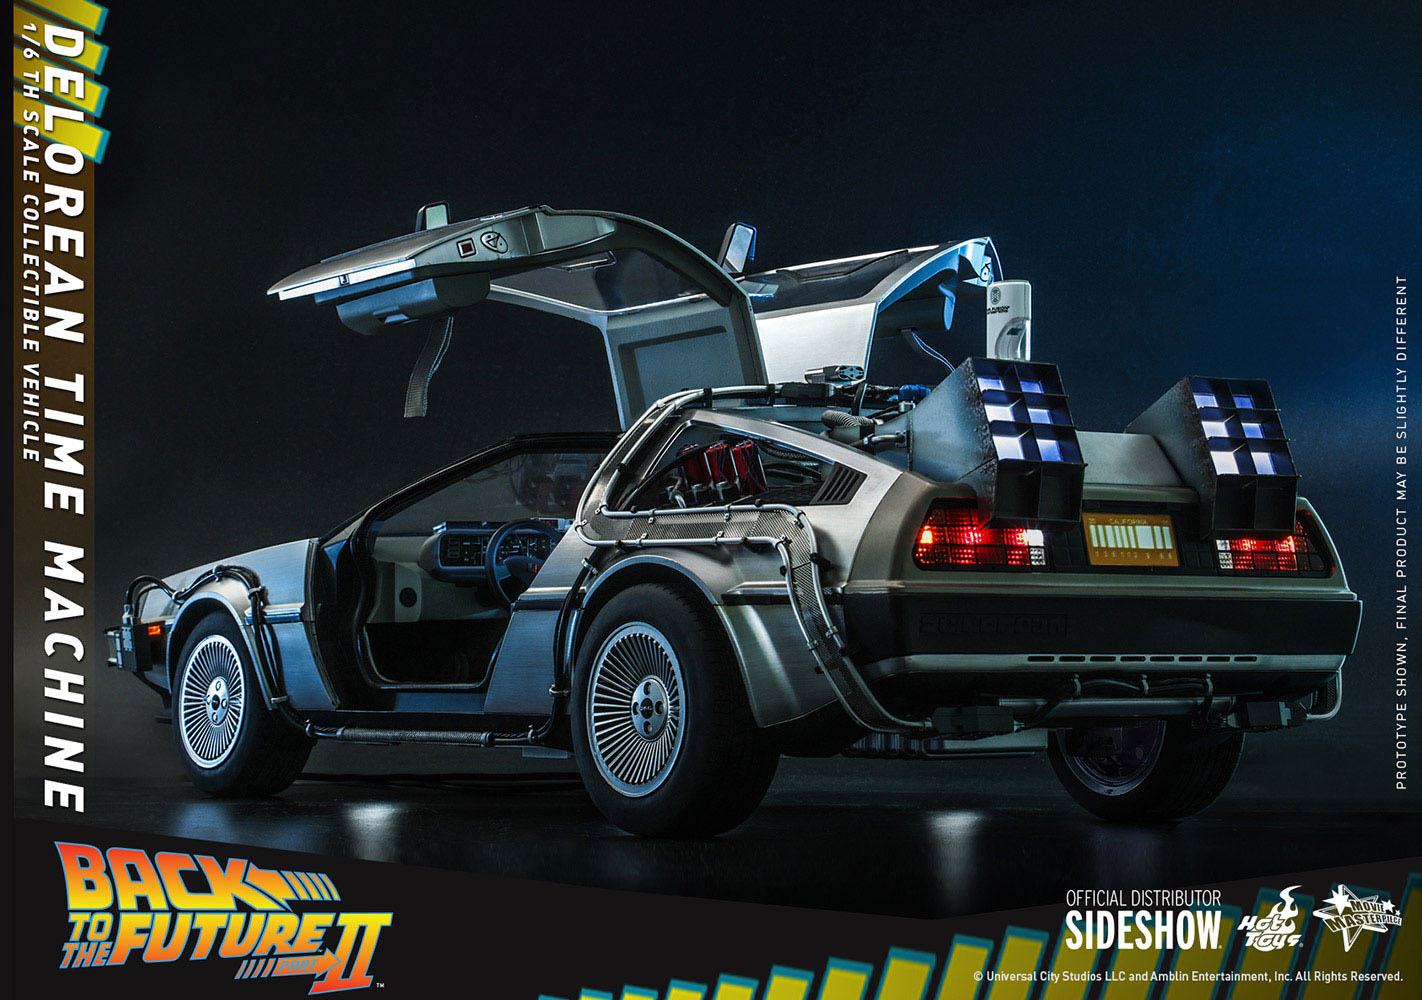 Hot Toys - Back to the Future II Movie Masterpiece Vehicle 1/6 DeLorean Time Machine 72cm - Arriving Late September 2023 - Loaded Dice Barry Vale of Glamorgan CF64 3HD